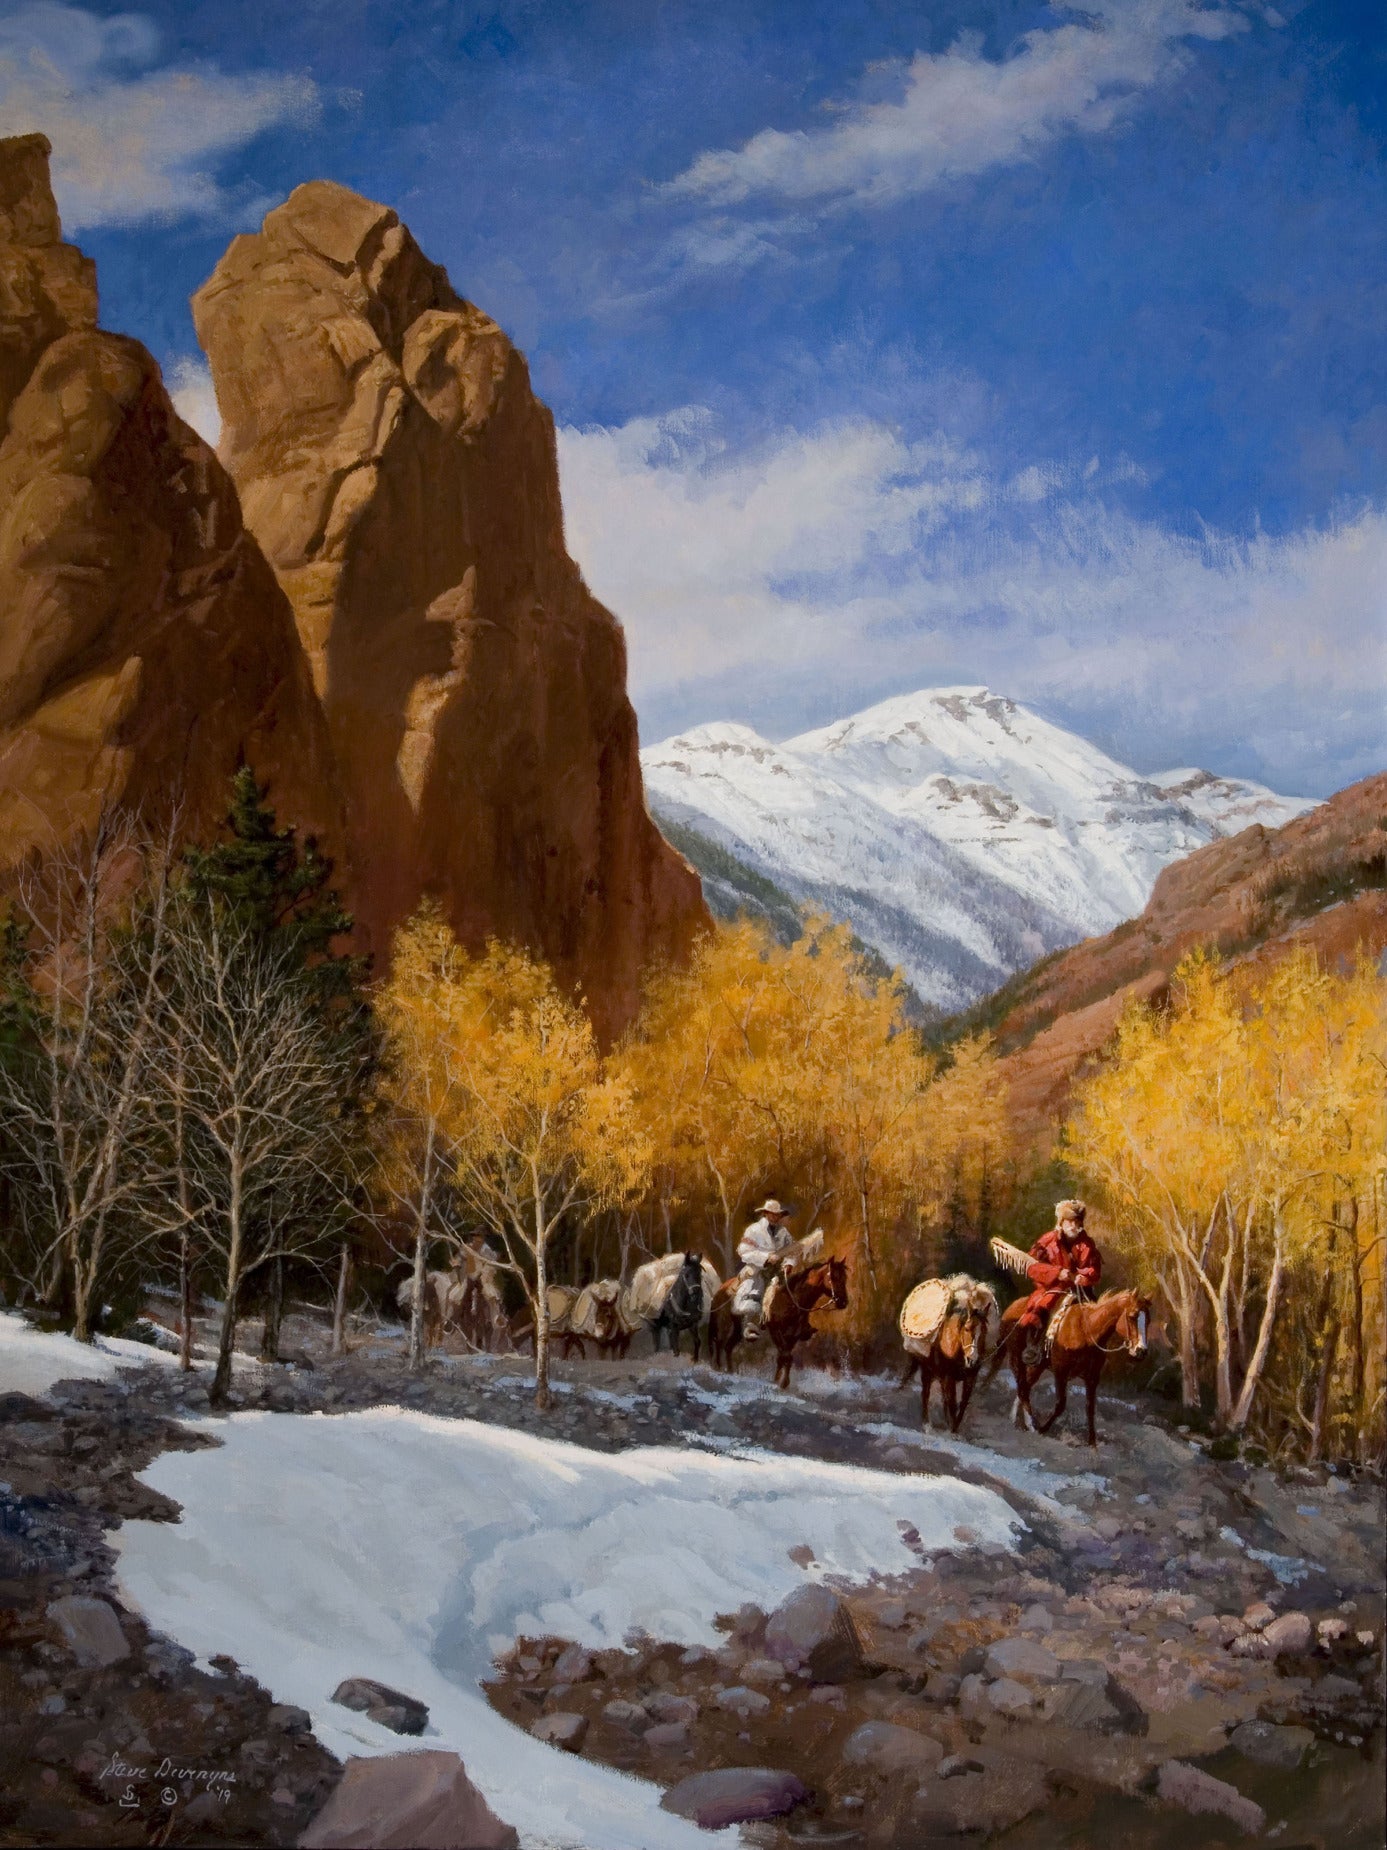 Deer Creek Trappers is a Oil Painting on Linen by the famous Western and Cowboy Artist Steve Devenyns. Steve has been featured in the Buffalo Bill Art Show, Prix de West Art Show, Bradford Brinton Museum. Original Paintings of Ranching, Wildlife and Cowboy art. True depictions of the American Cowboy modern and past.